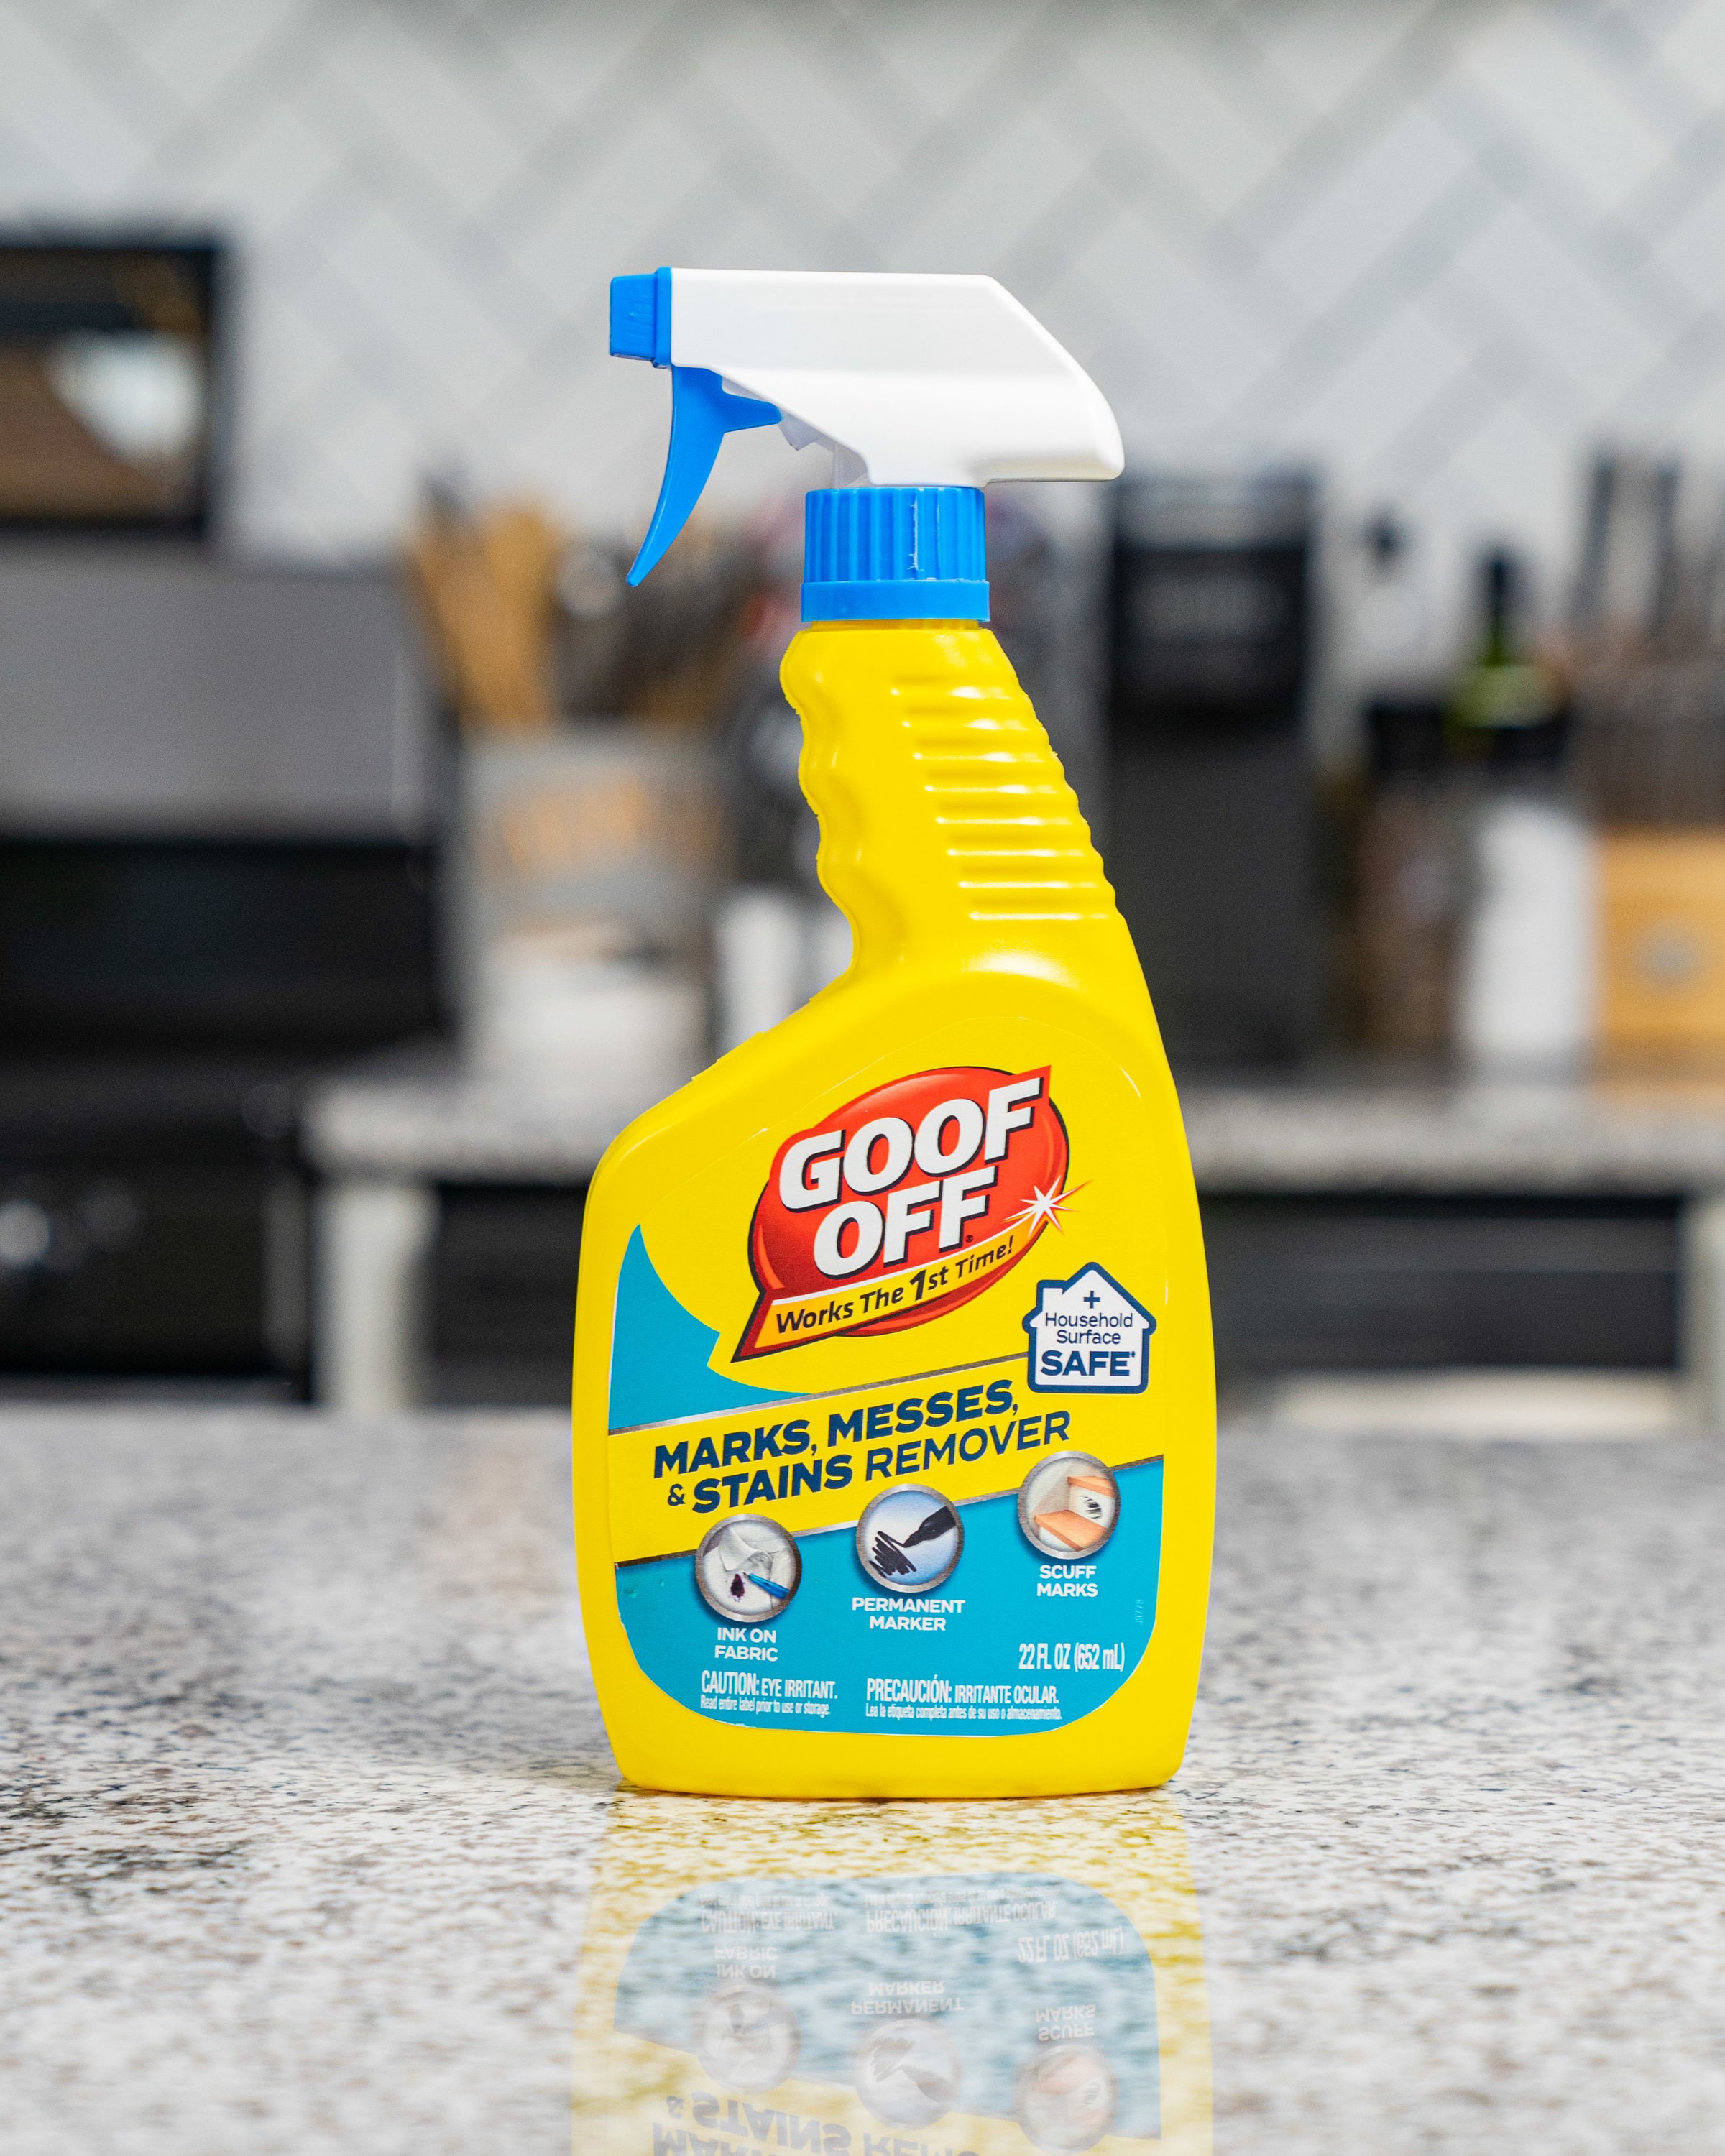 Goof Off Household Heavy Duty Remover